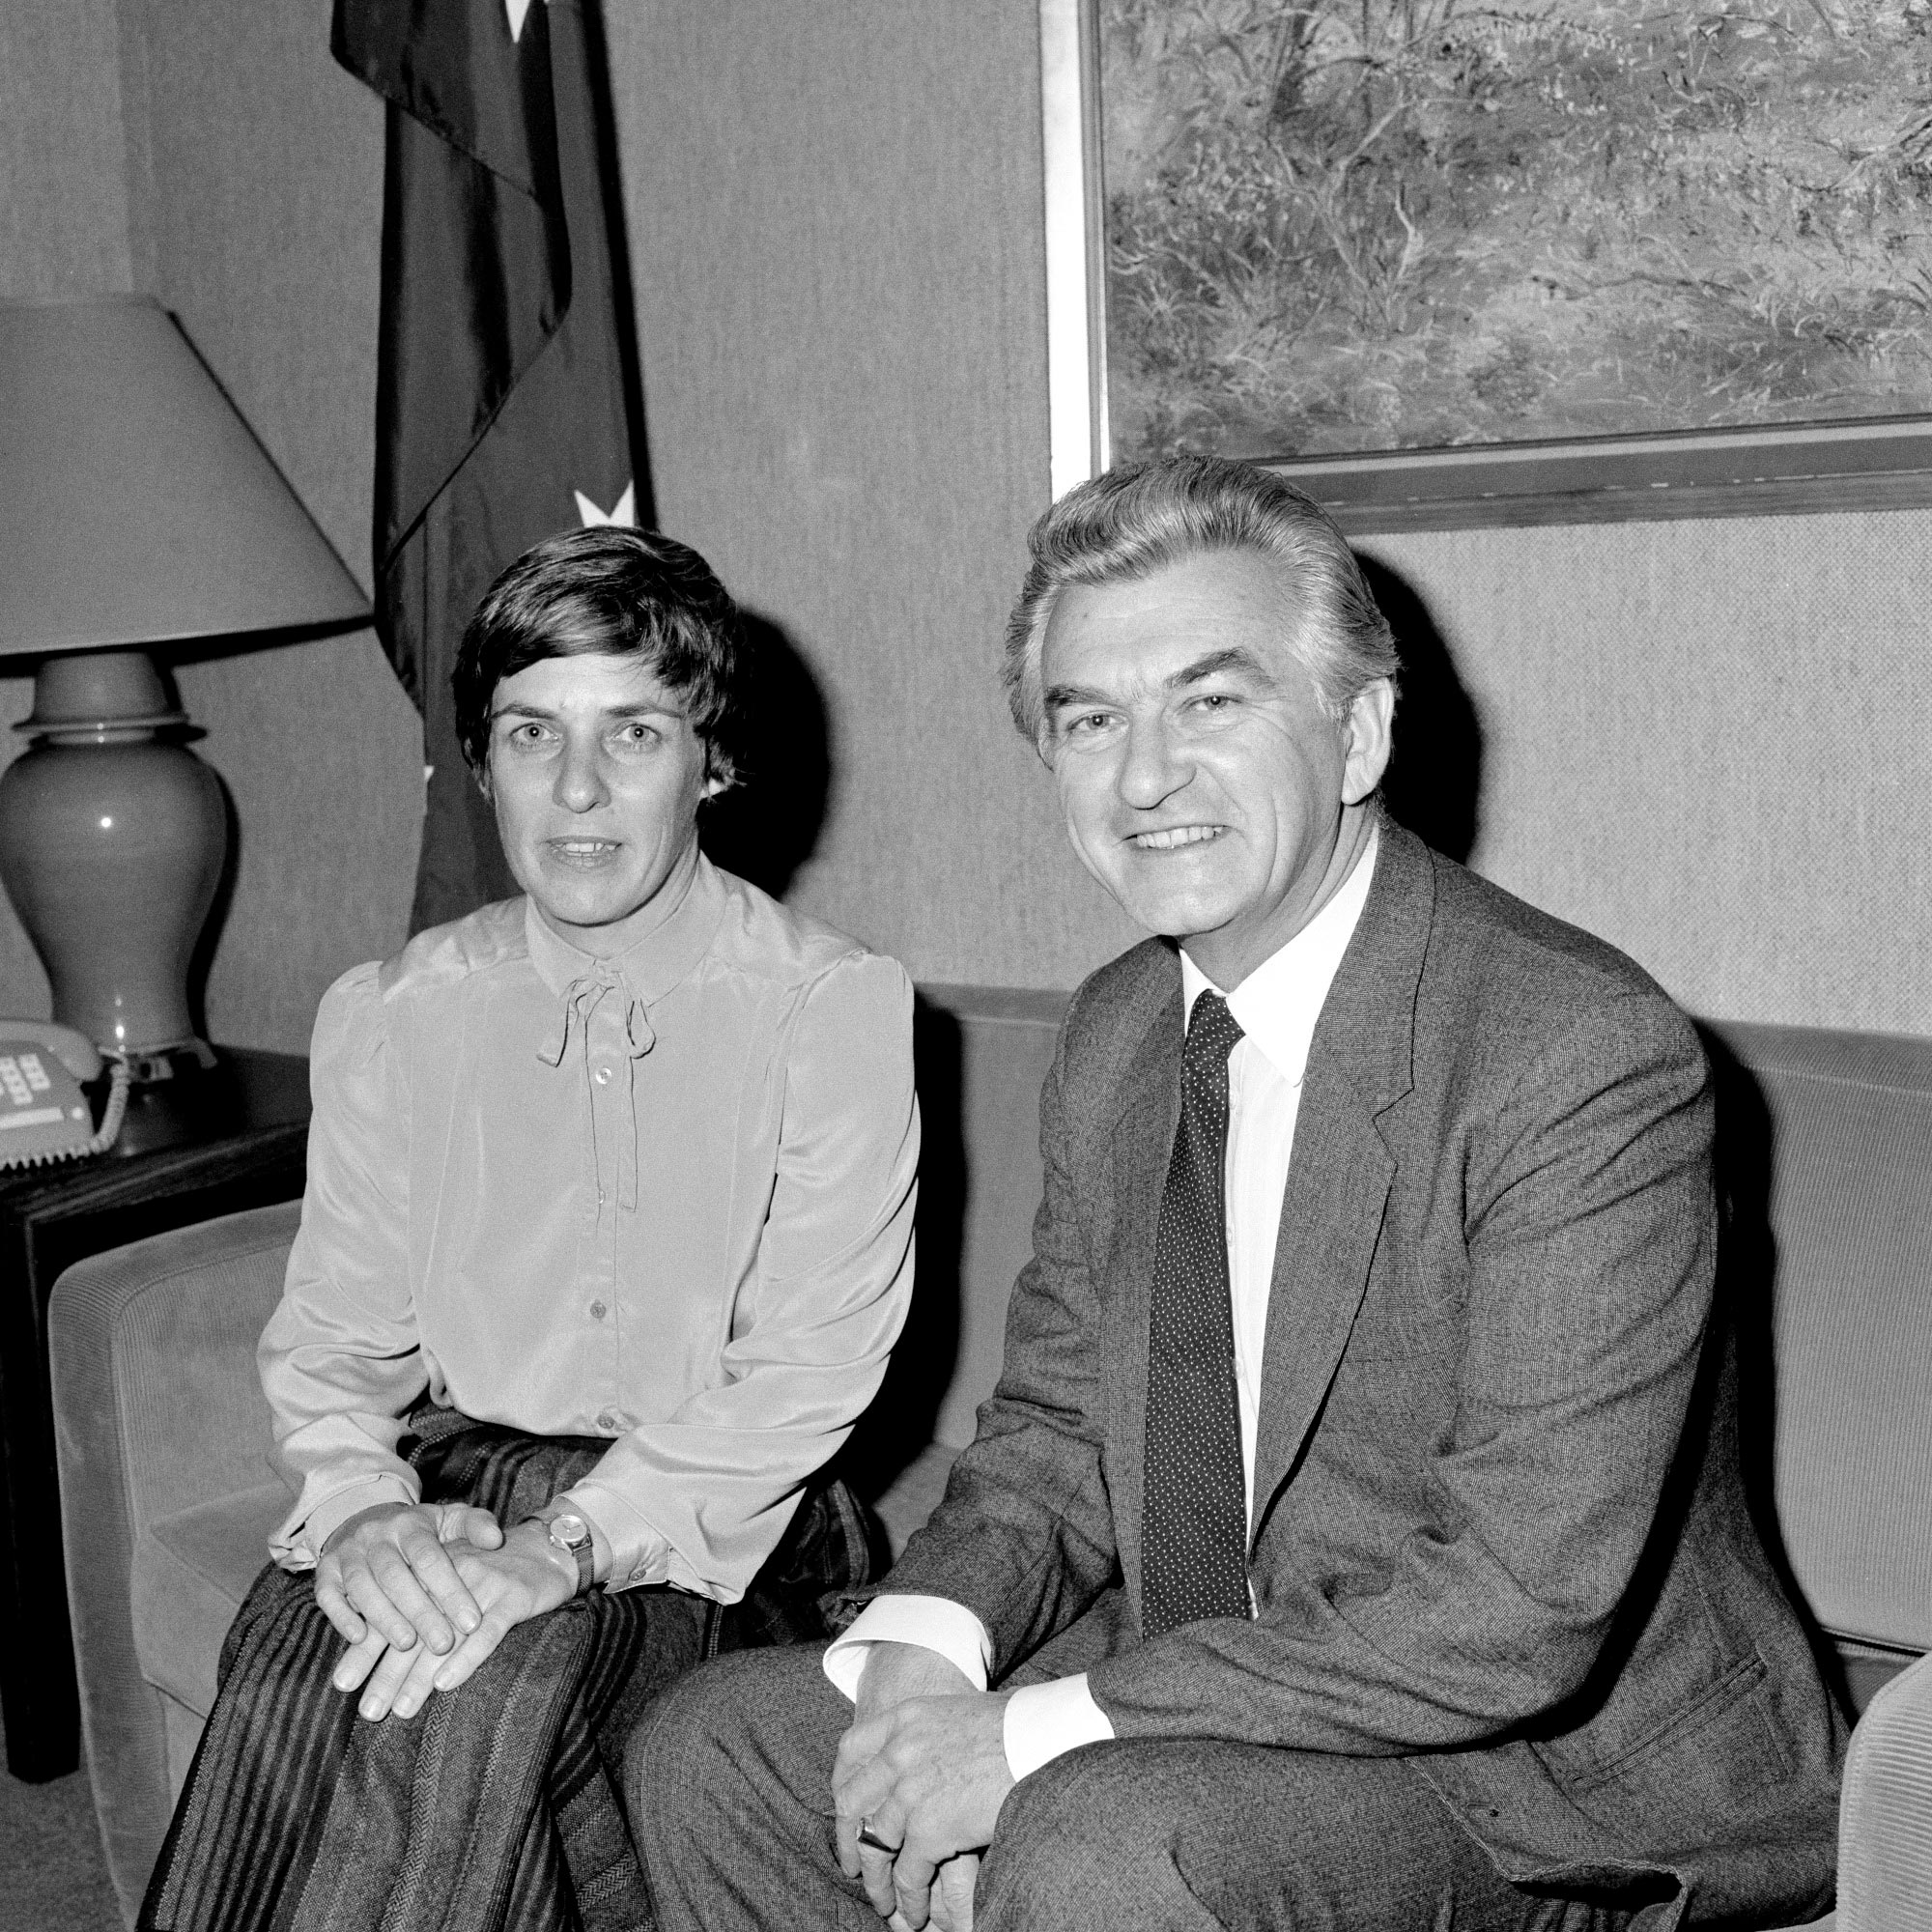 Prime Minister Bob Hawke with Sex Discrimination Commissioner Pam O'Neill, 1984
